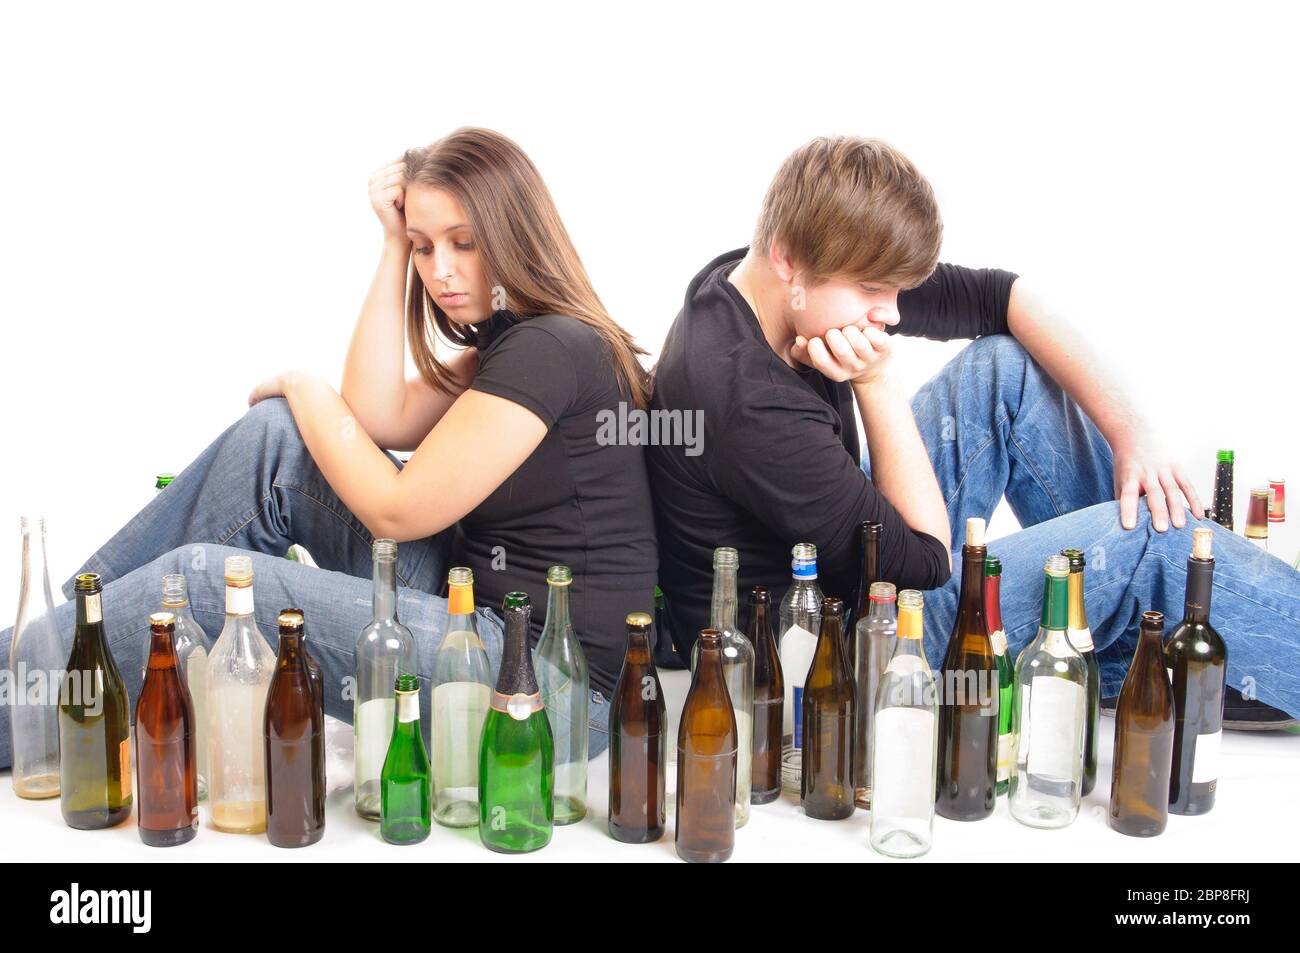 Leeren High Resolution Stock Photography and Images - Alamy